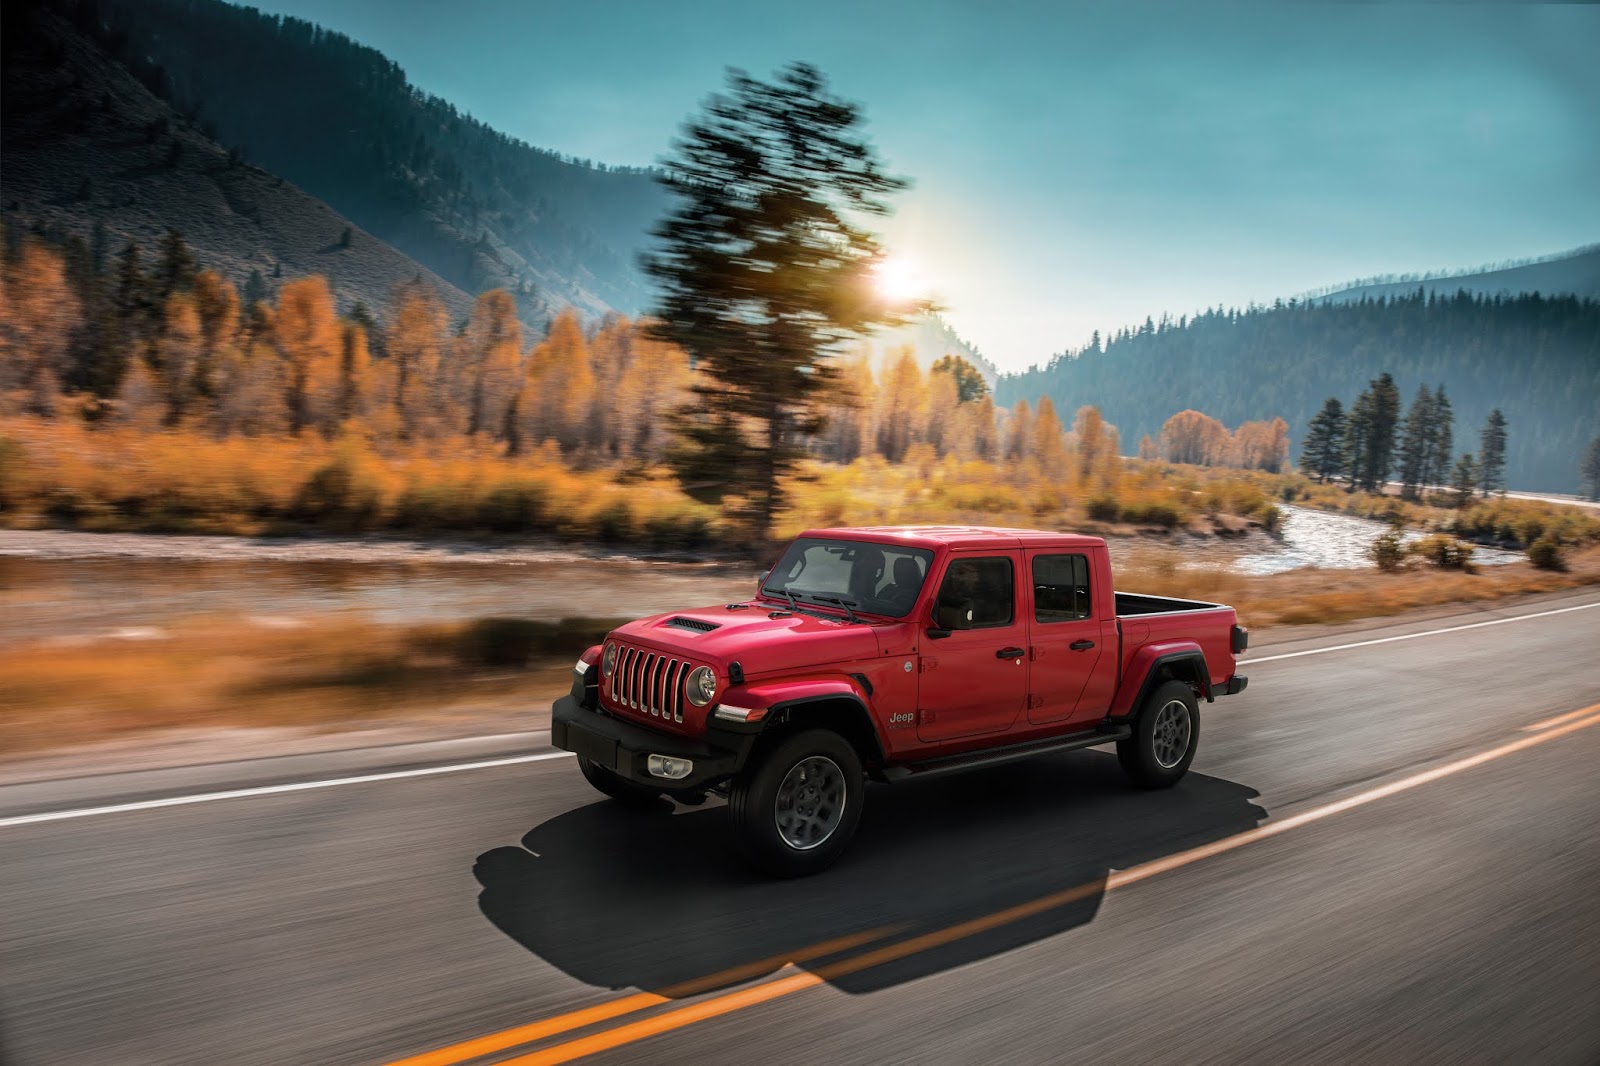 HP Overland2Bred To Jeep Gladiator, έρχεται να αλλάξει τα δεδομένα στην κατηγορία των pick-up